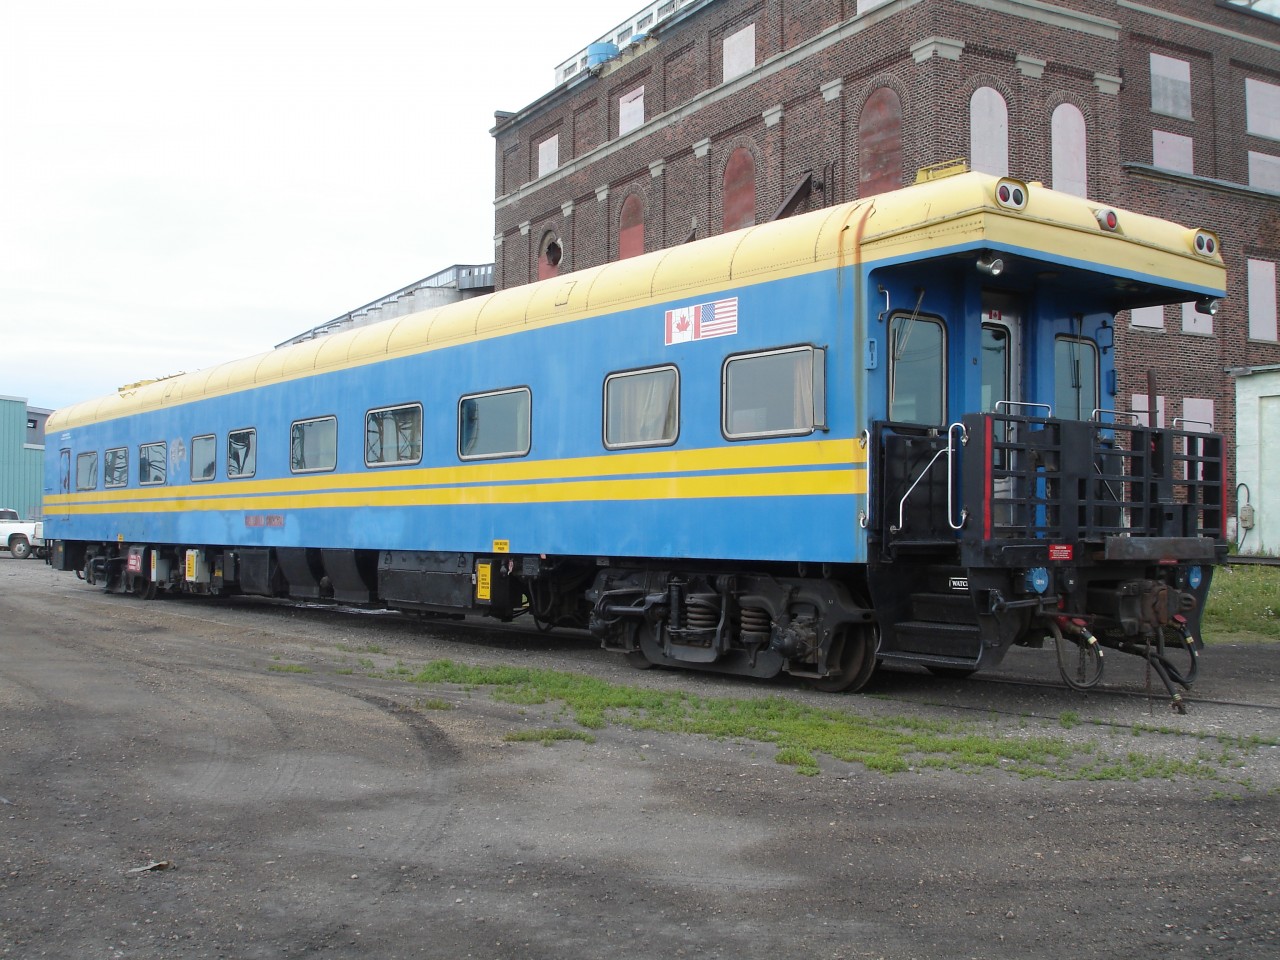 What an interesting find on this July 23, 2008 afternoon in Churchill, MB.  Somewhat imitating a VIA Rail paint scheme with its yellow & blue colours and stripes, this business car was devoid of any identification other than its AMTRAK certification No. 800576, and a stencil above the galley door reading 'Jonathan Wood Oklahoma City, Oklahoma'.  Closer inspection of the car revealed it was last named 'Canadian Sunrise' which allowed me to trace it backwards as ex-NREX 'Royal Adventure', exx-CN 100 'Bonaventure', exxx-CN 90, exxxxx-CN 23.  Built in 1959 it is one year shy of 50 years old.  Photo taken by David Wylie and submitted with permission.